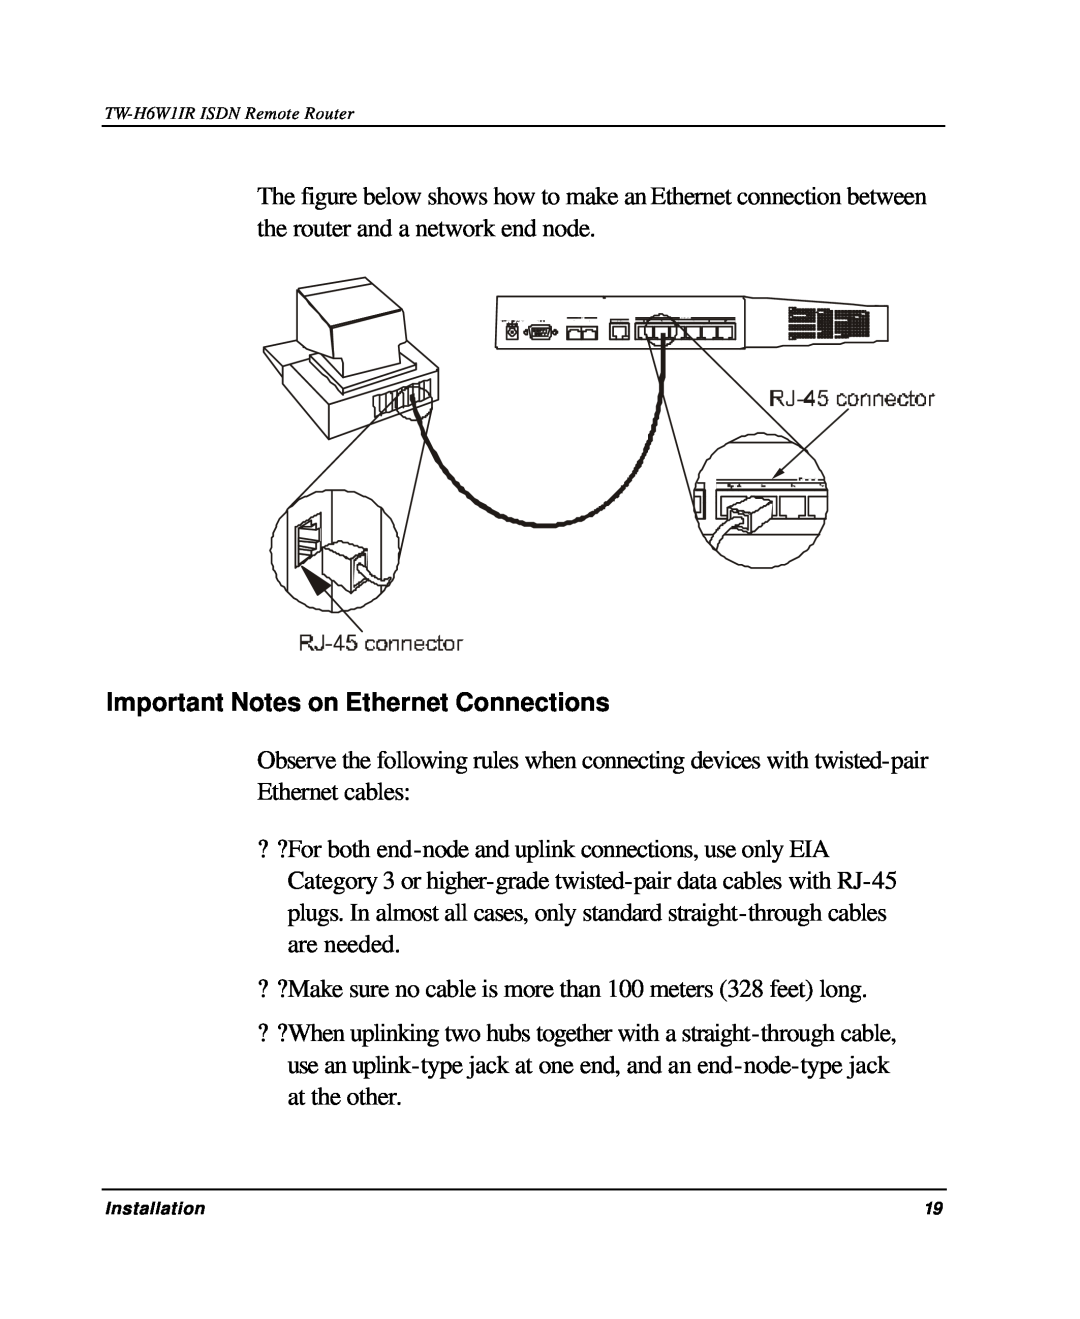 TRENDnet TW-H6W1IR manual Important Notes on Ethernet Connections 